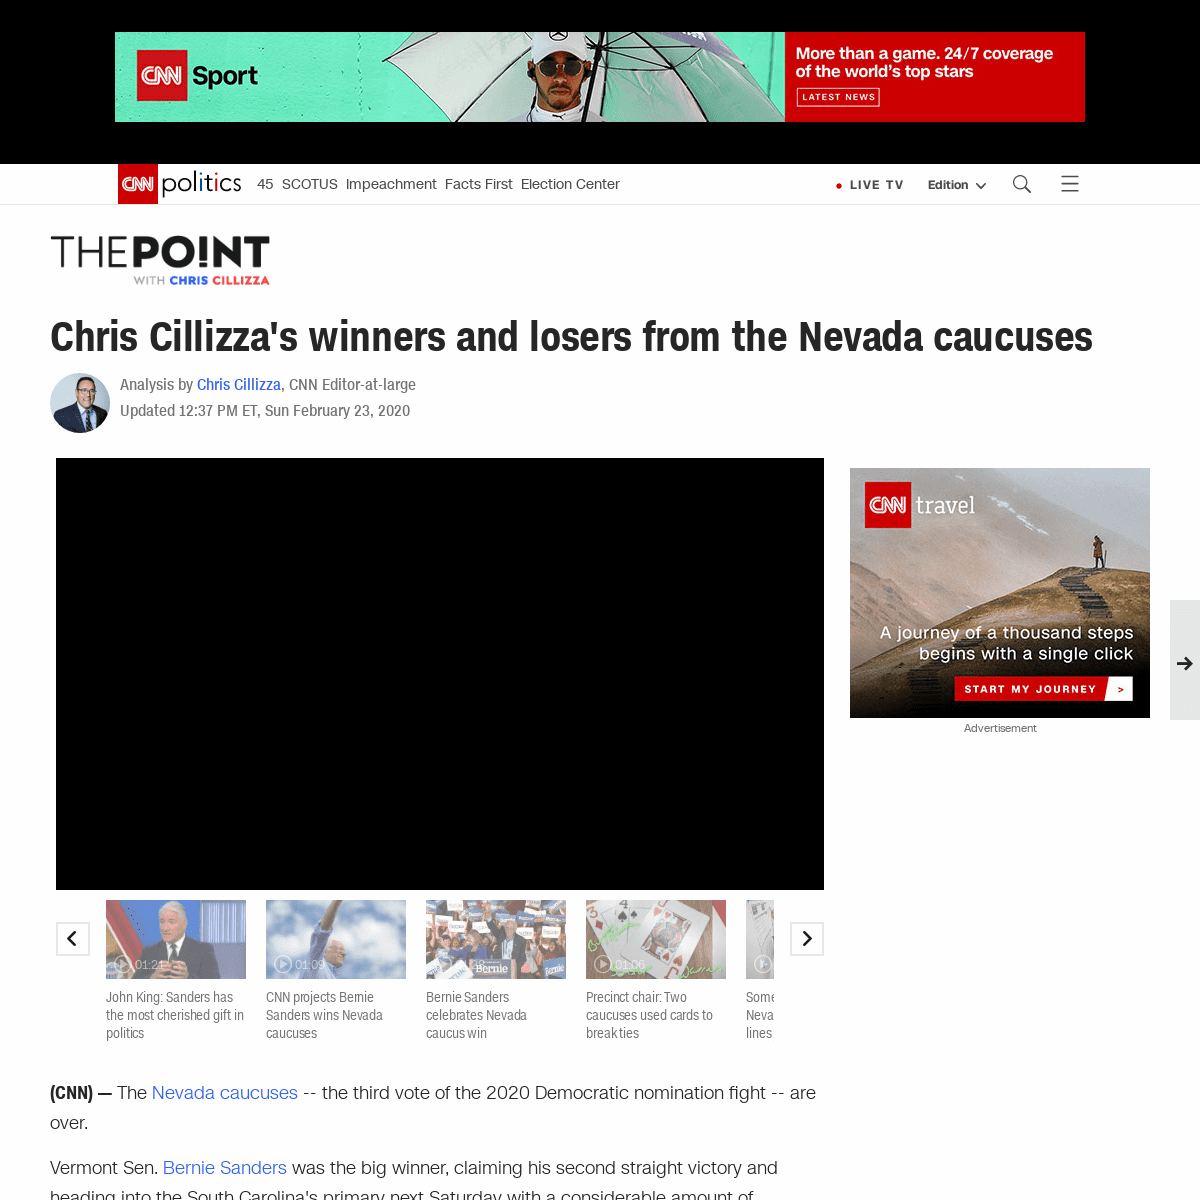 A complete backup of www.cnn.com/2020/02/22/politics/who-won-nevada-caucuses/index.html